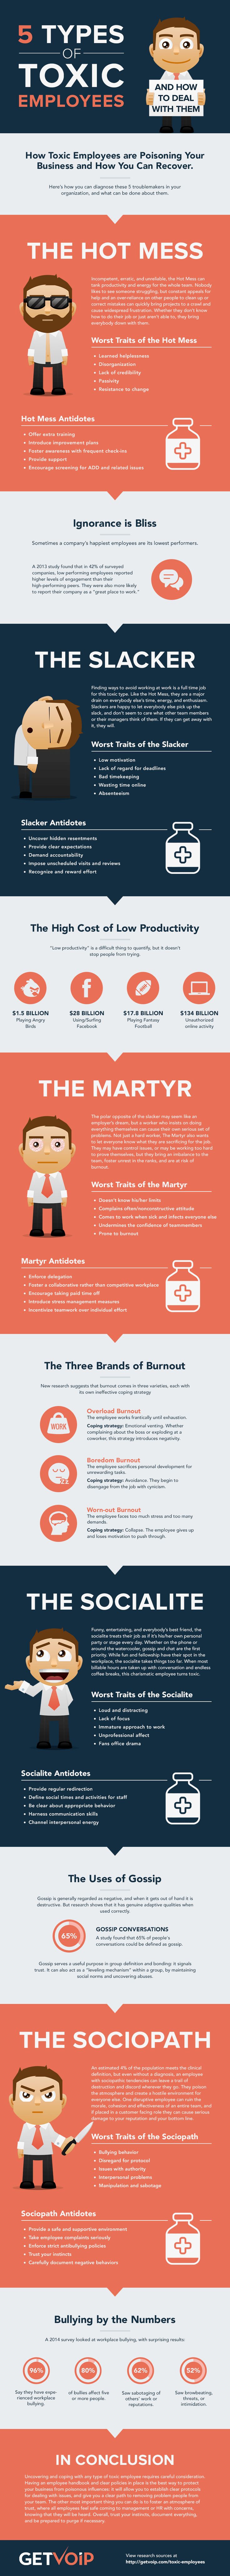 Infographic-5-Types-of-Toxic-Employees-and-How-to Infographic : 5 Types of Toxic Employees and How to Deal With Them (Infographic)